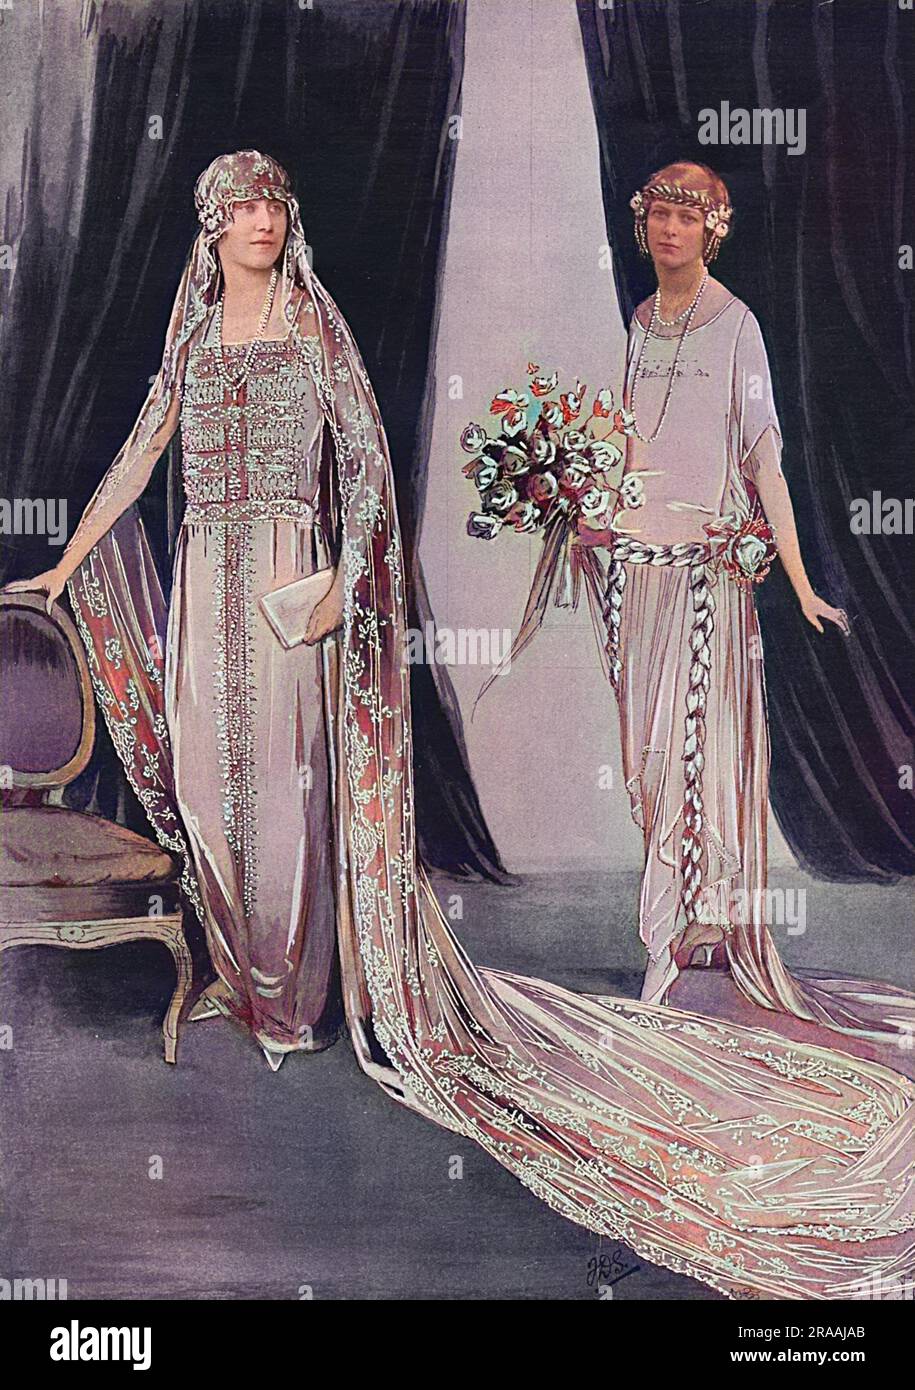 The bridal gown of Lady Elizabeth Bowes-Lyon for her marriage to Prince Albert, Duke of York on 26 April 1923 at Westminster Abbey, designed by Madame Handley Seymour in a medieval style.  The face of Lady Mary Cambridge, one of the bridesmaids, is superimposed onto an example of the bridesmaid dress.     Date: 1923 Stock Photo